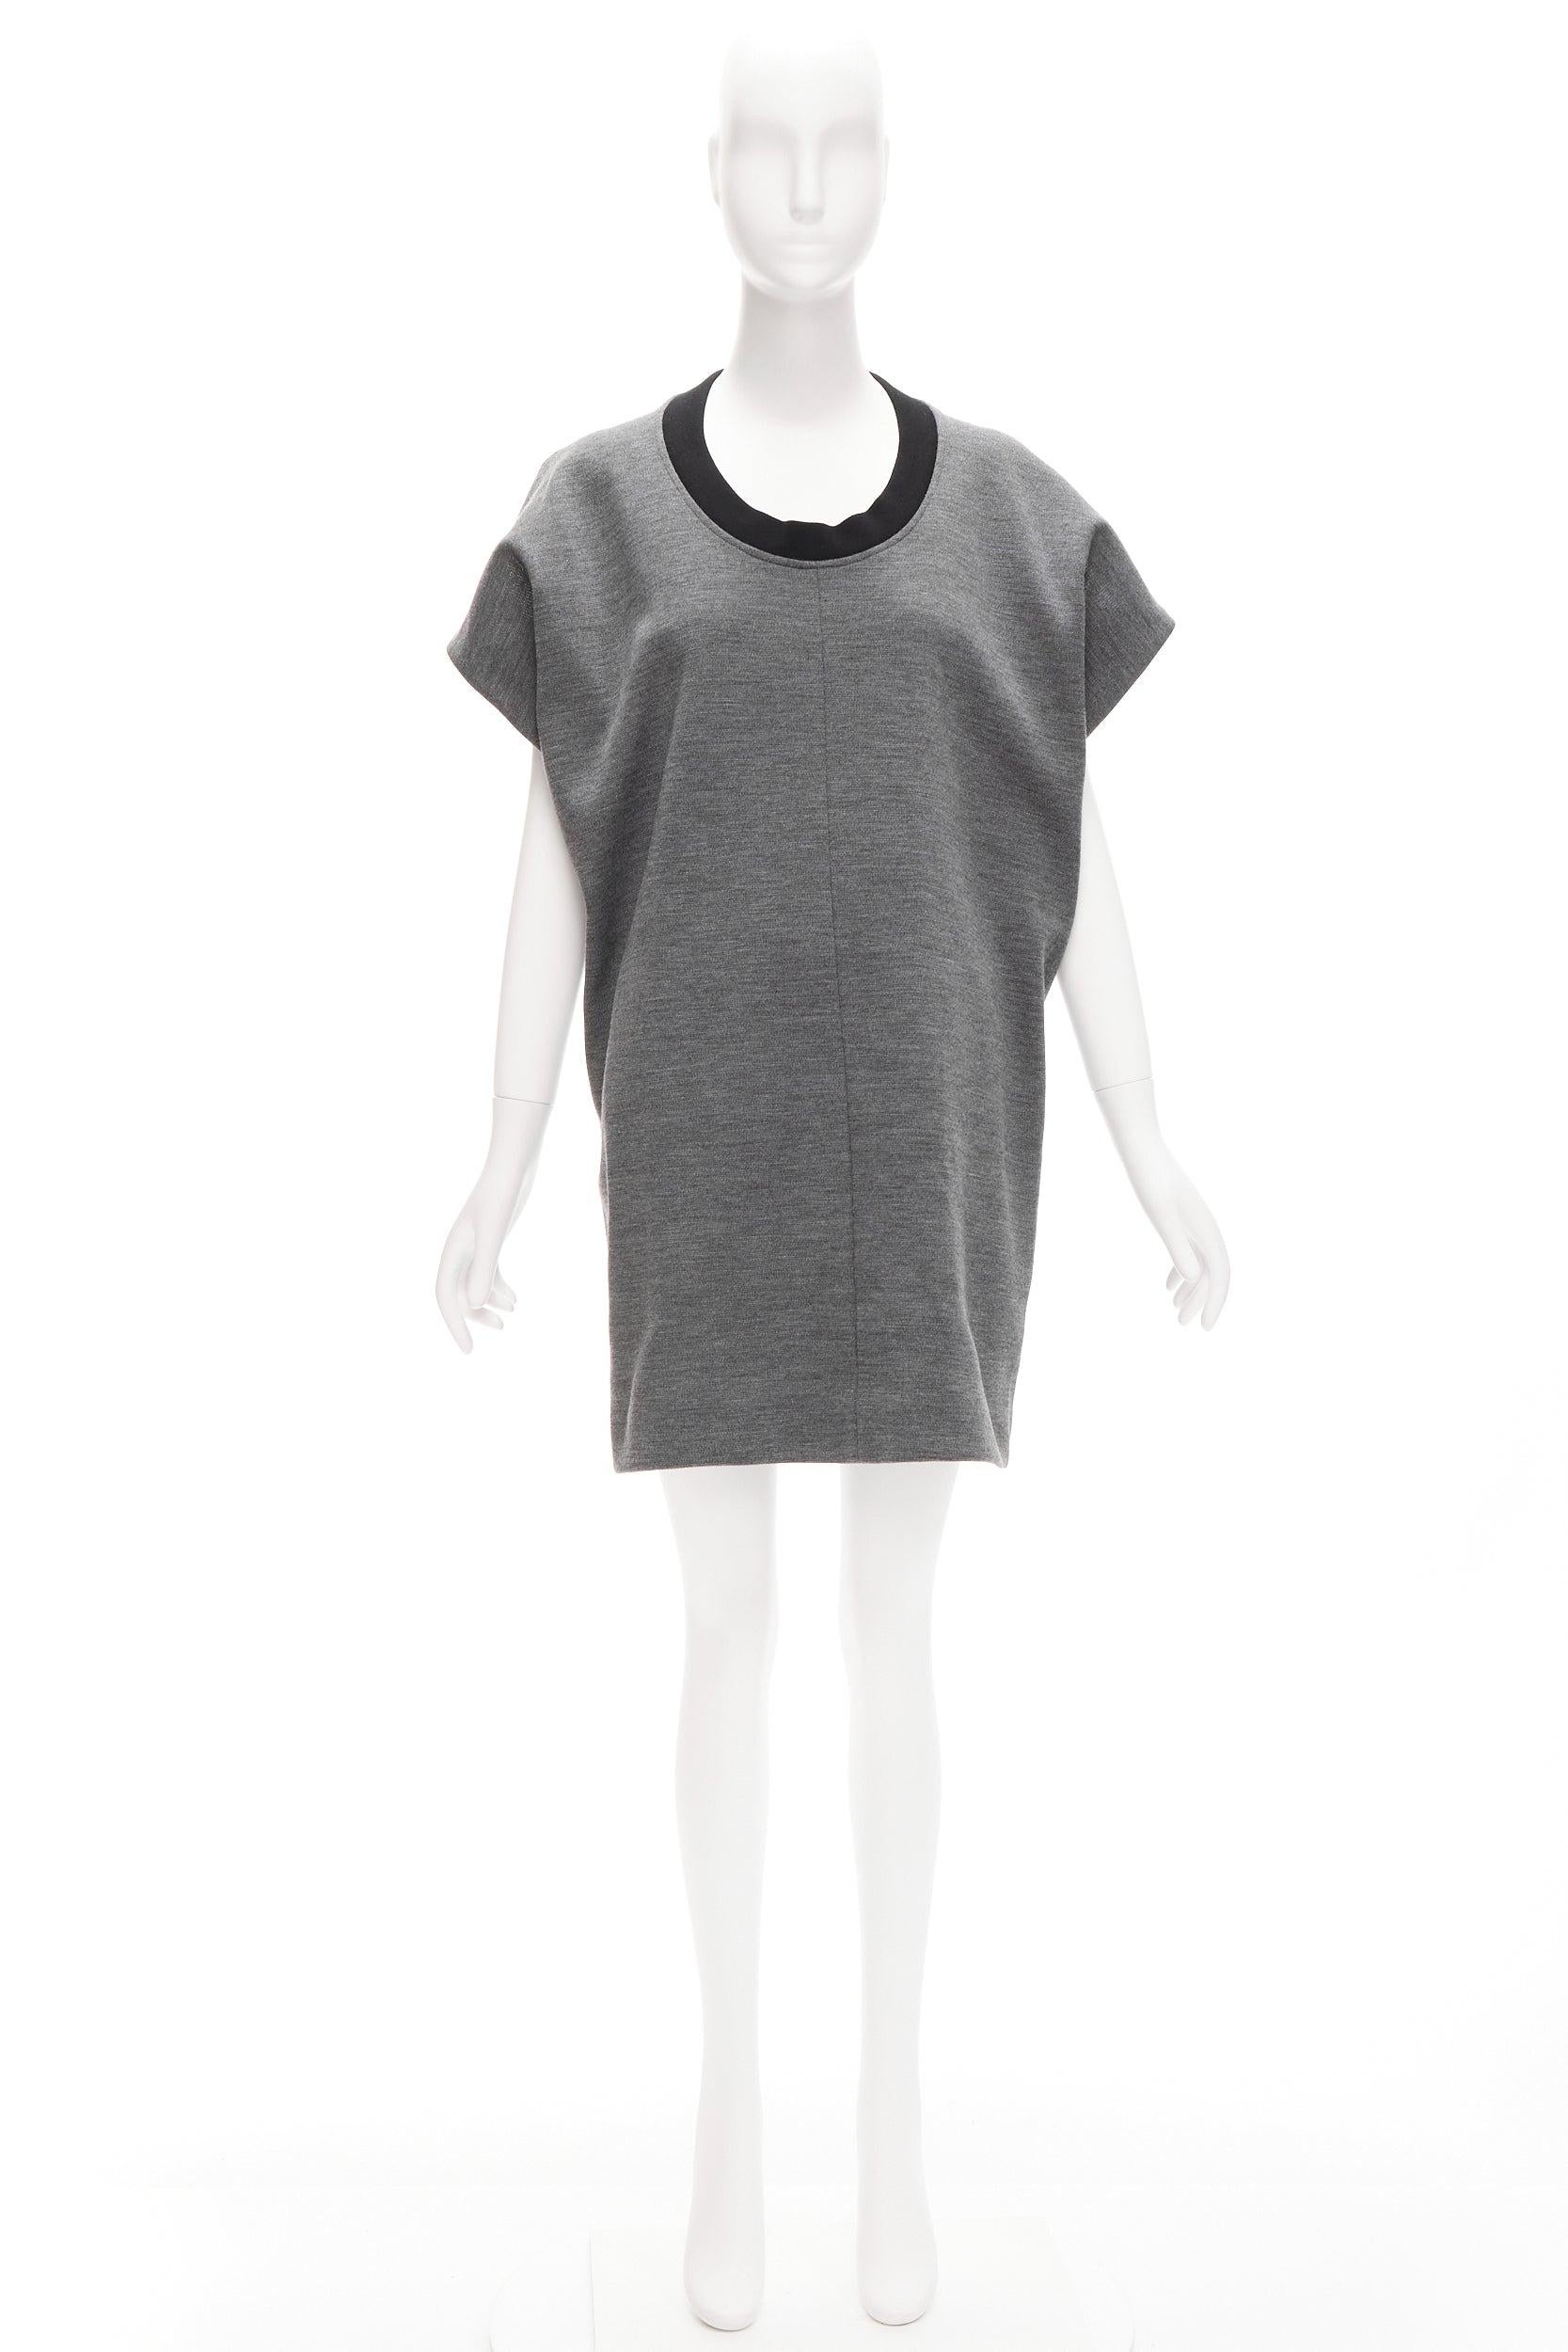 MARNI grey virgin wool blend 3D cut structured boxy casual dress IT40 S For Sale 3